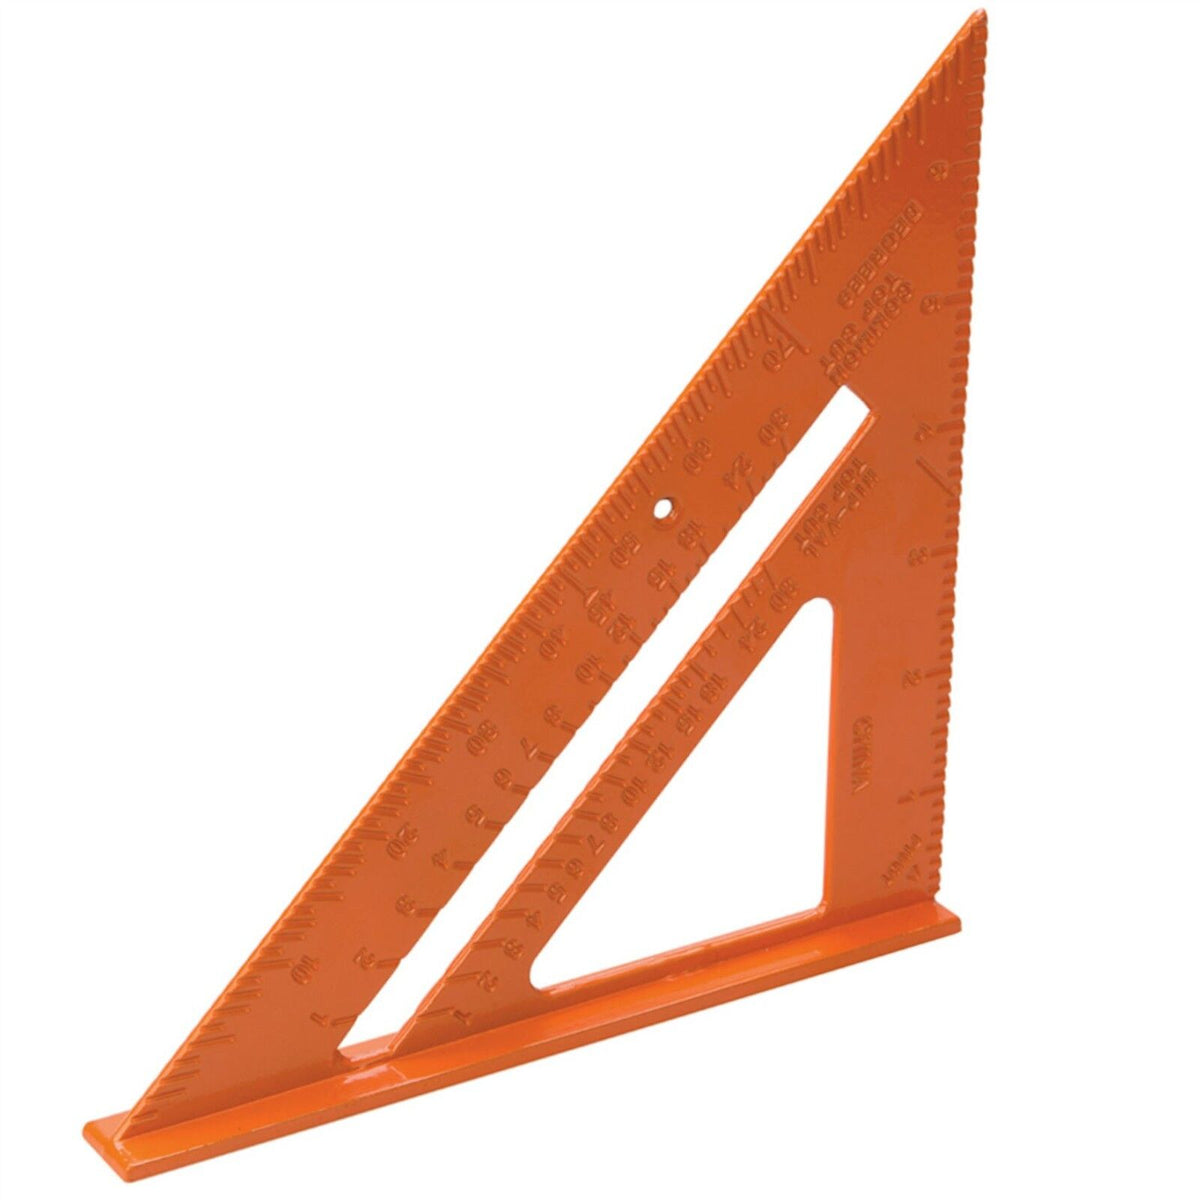 Aluminium Alloy Roofing Carpenters Square 185mm Marking Out Square